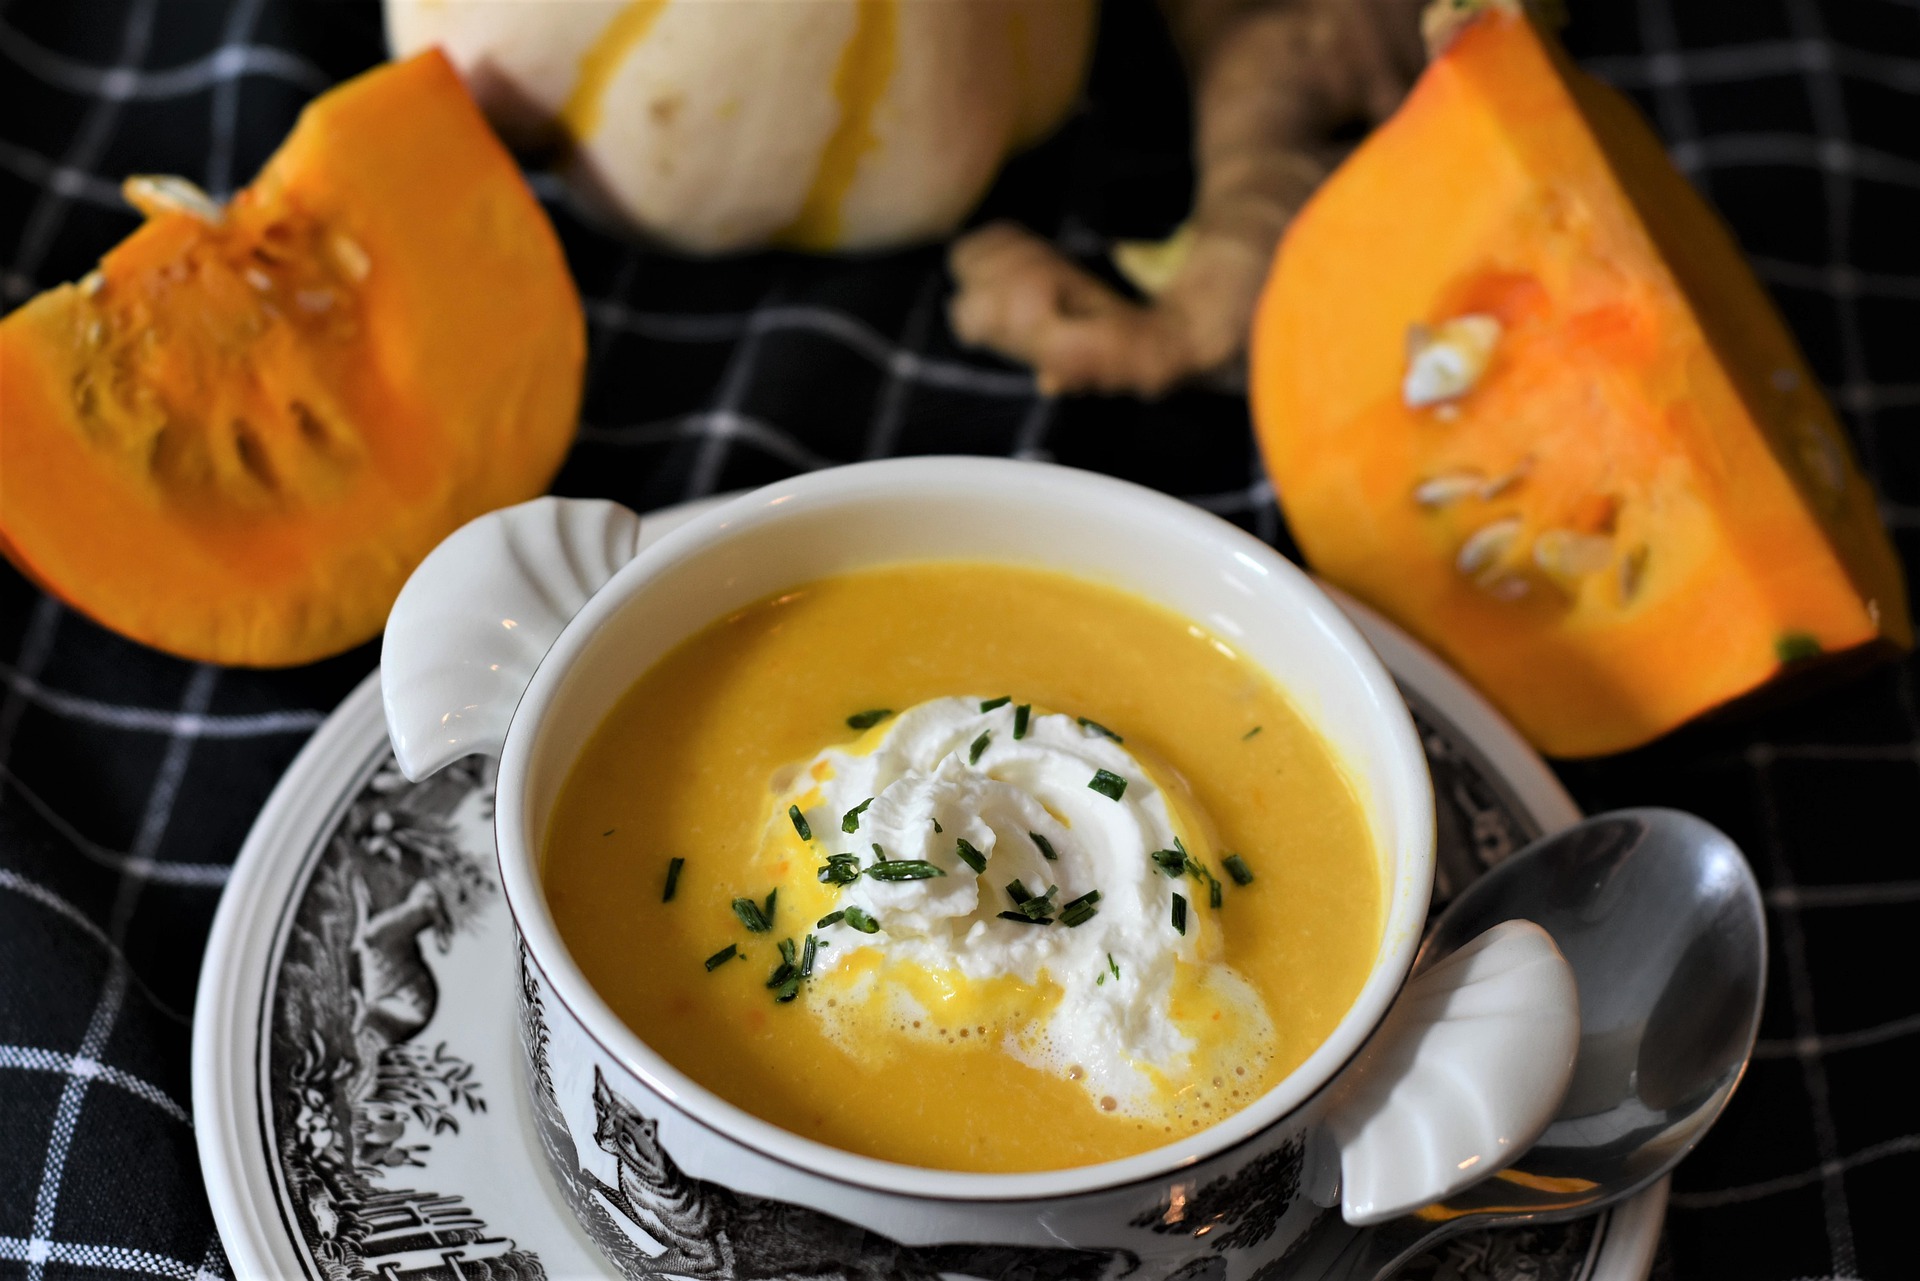 Pumpkin soup incorporates some of fall’s bounty. (Photo courtesy of Pixabay)